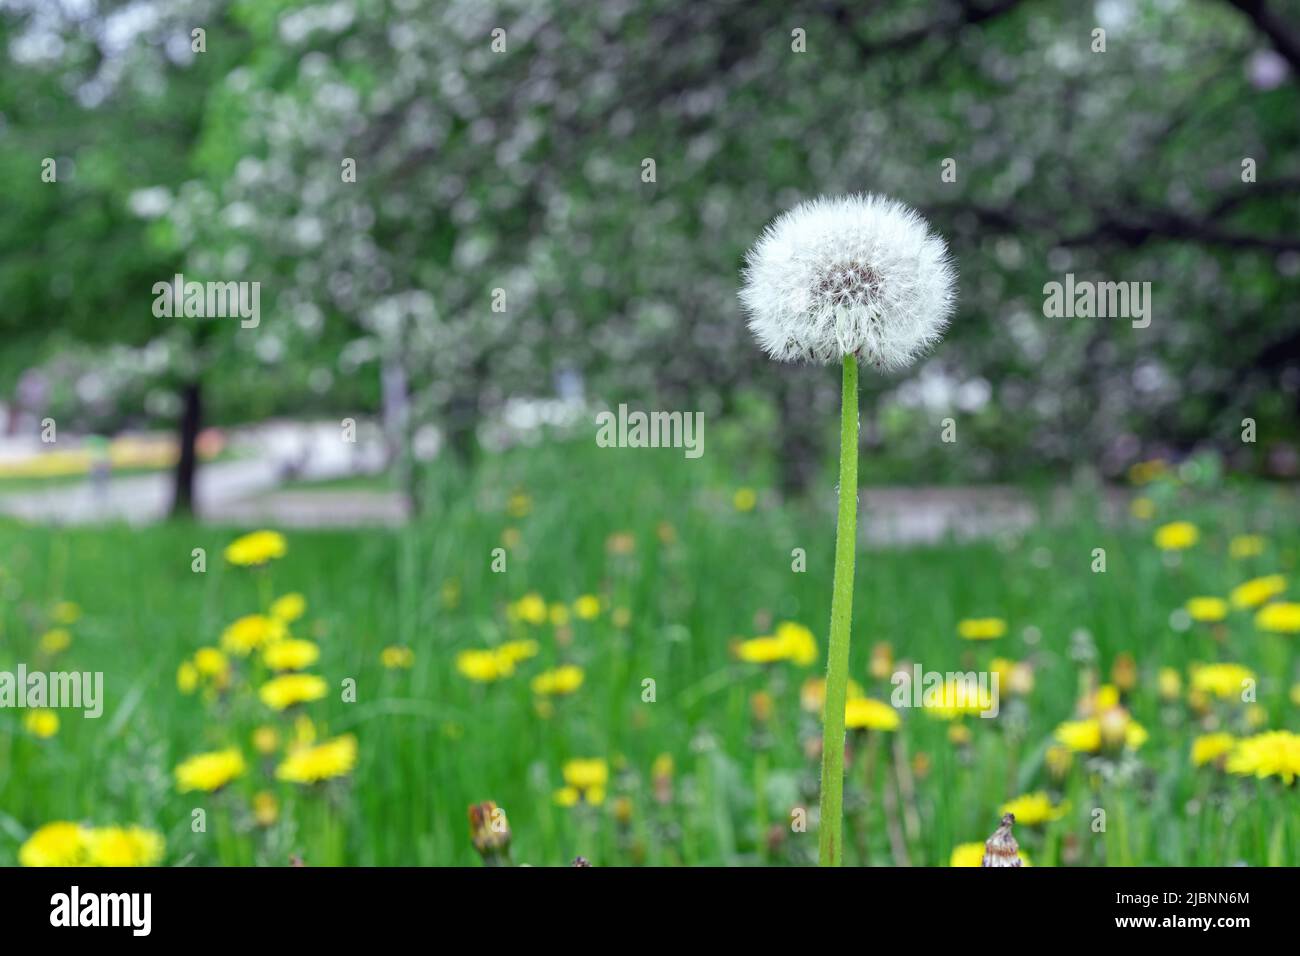 White fluffy dandelion in a meadow with green grass and yellow dandelions. Stock Photo